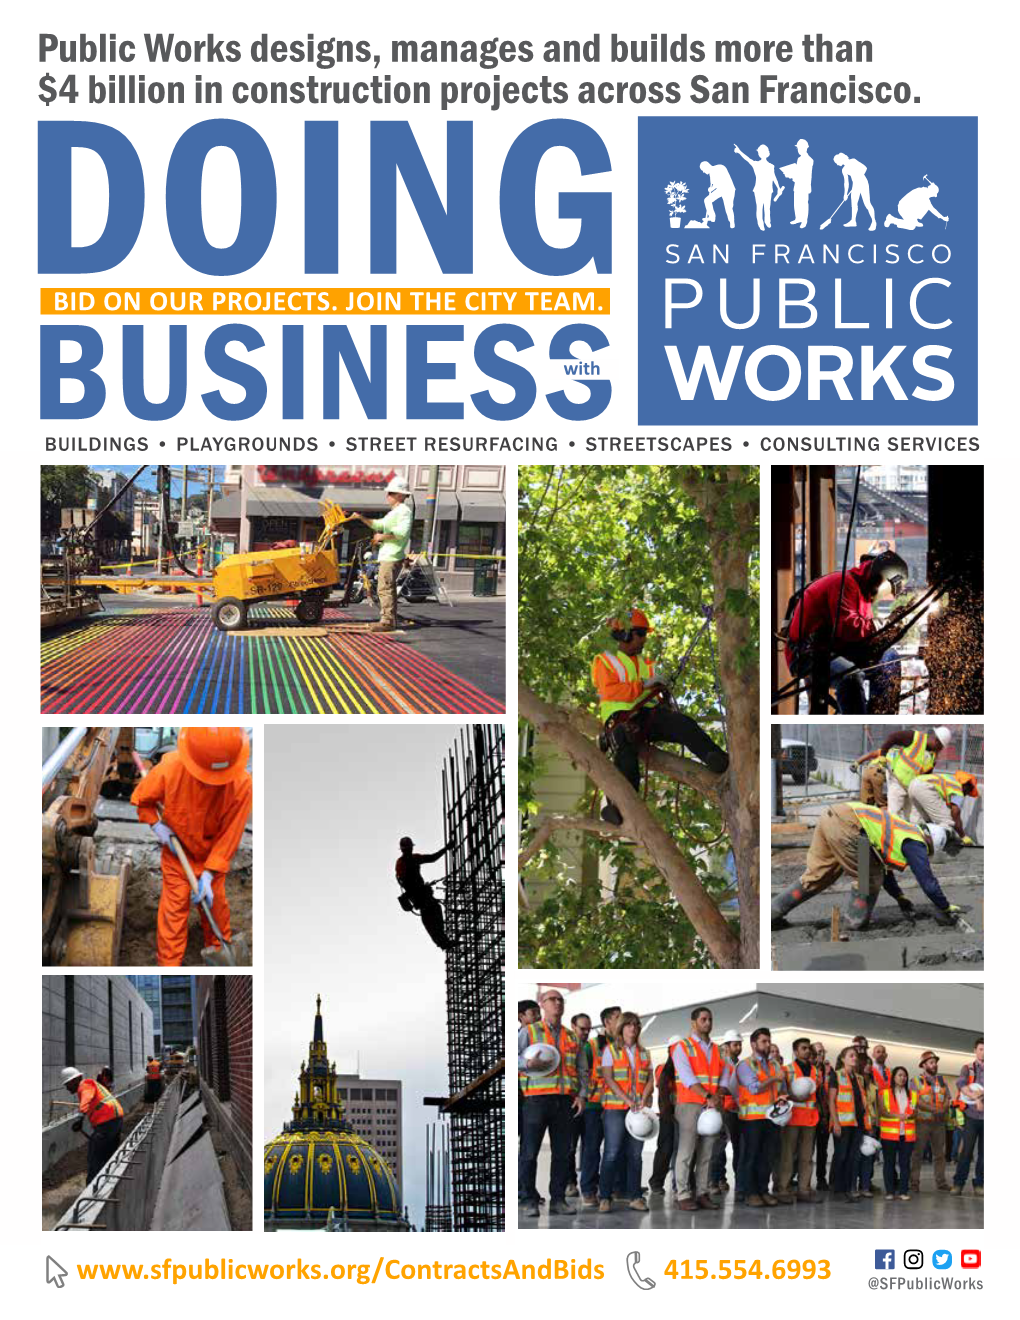 Public Works Designs, Manages and Builds More Than $4 Billion in Construction Projects Across San Francisco